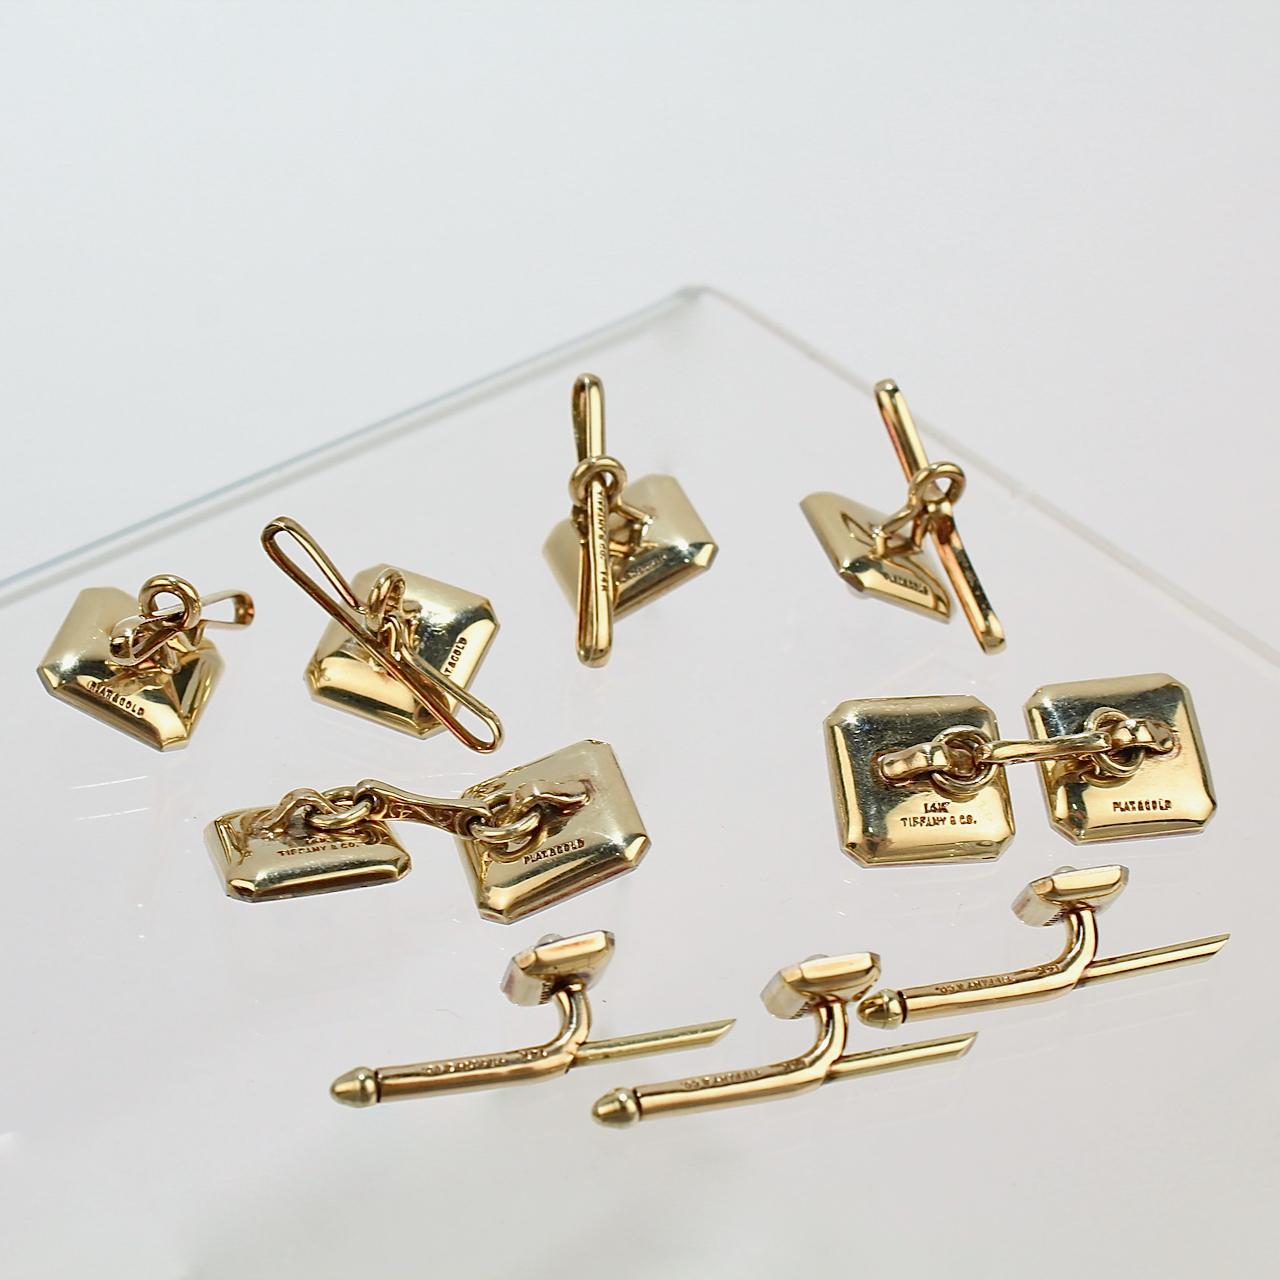 Tiffany & Co Art Deco Cufflink Dress Set in 14K Gold & Platinum with Seed Pearls 12